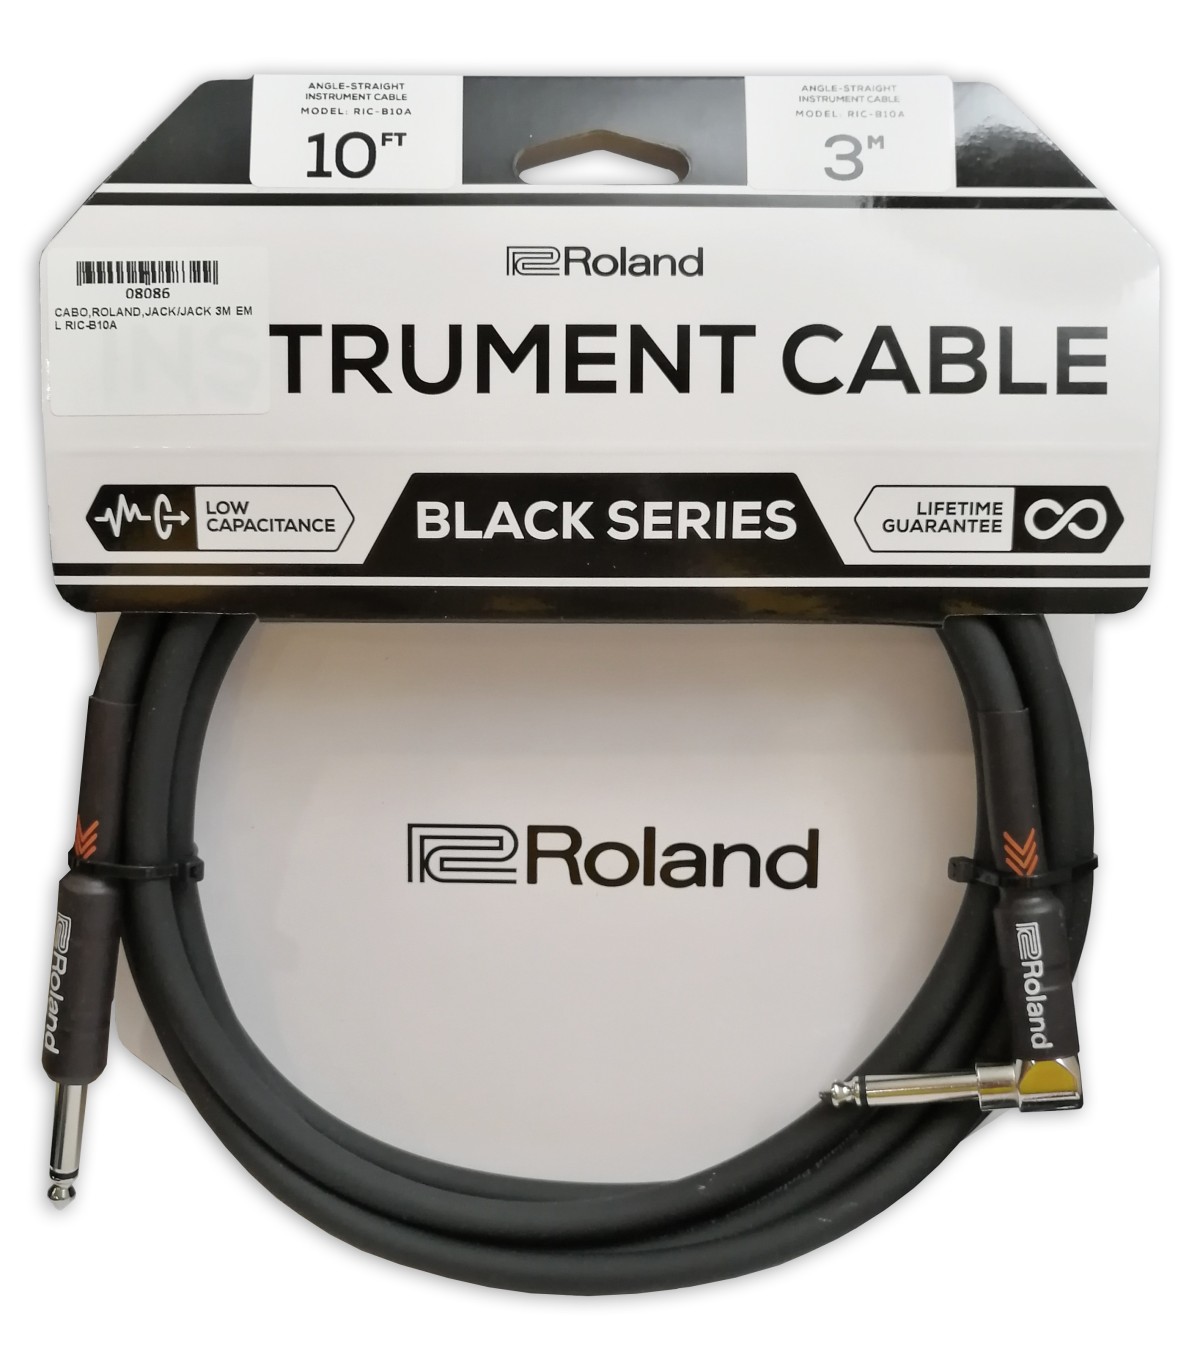 Roland RIC-B10A Jack Jack 3m in L, Cable